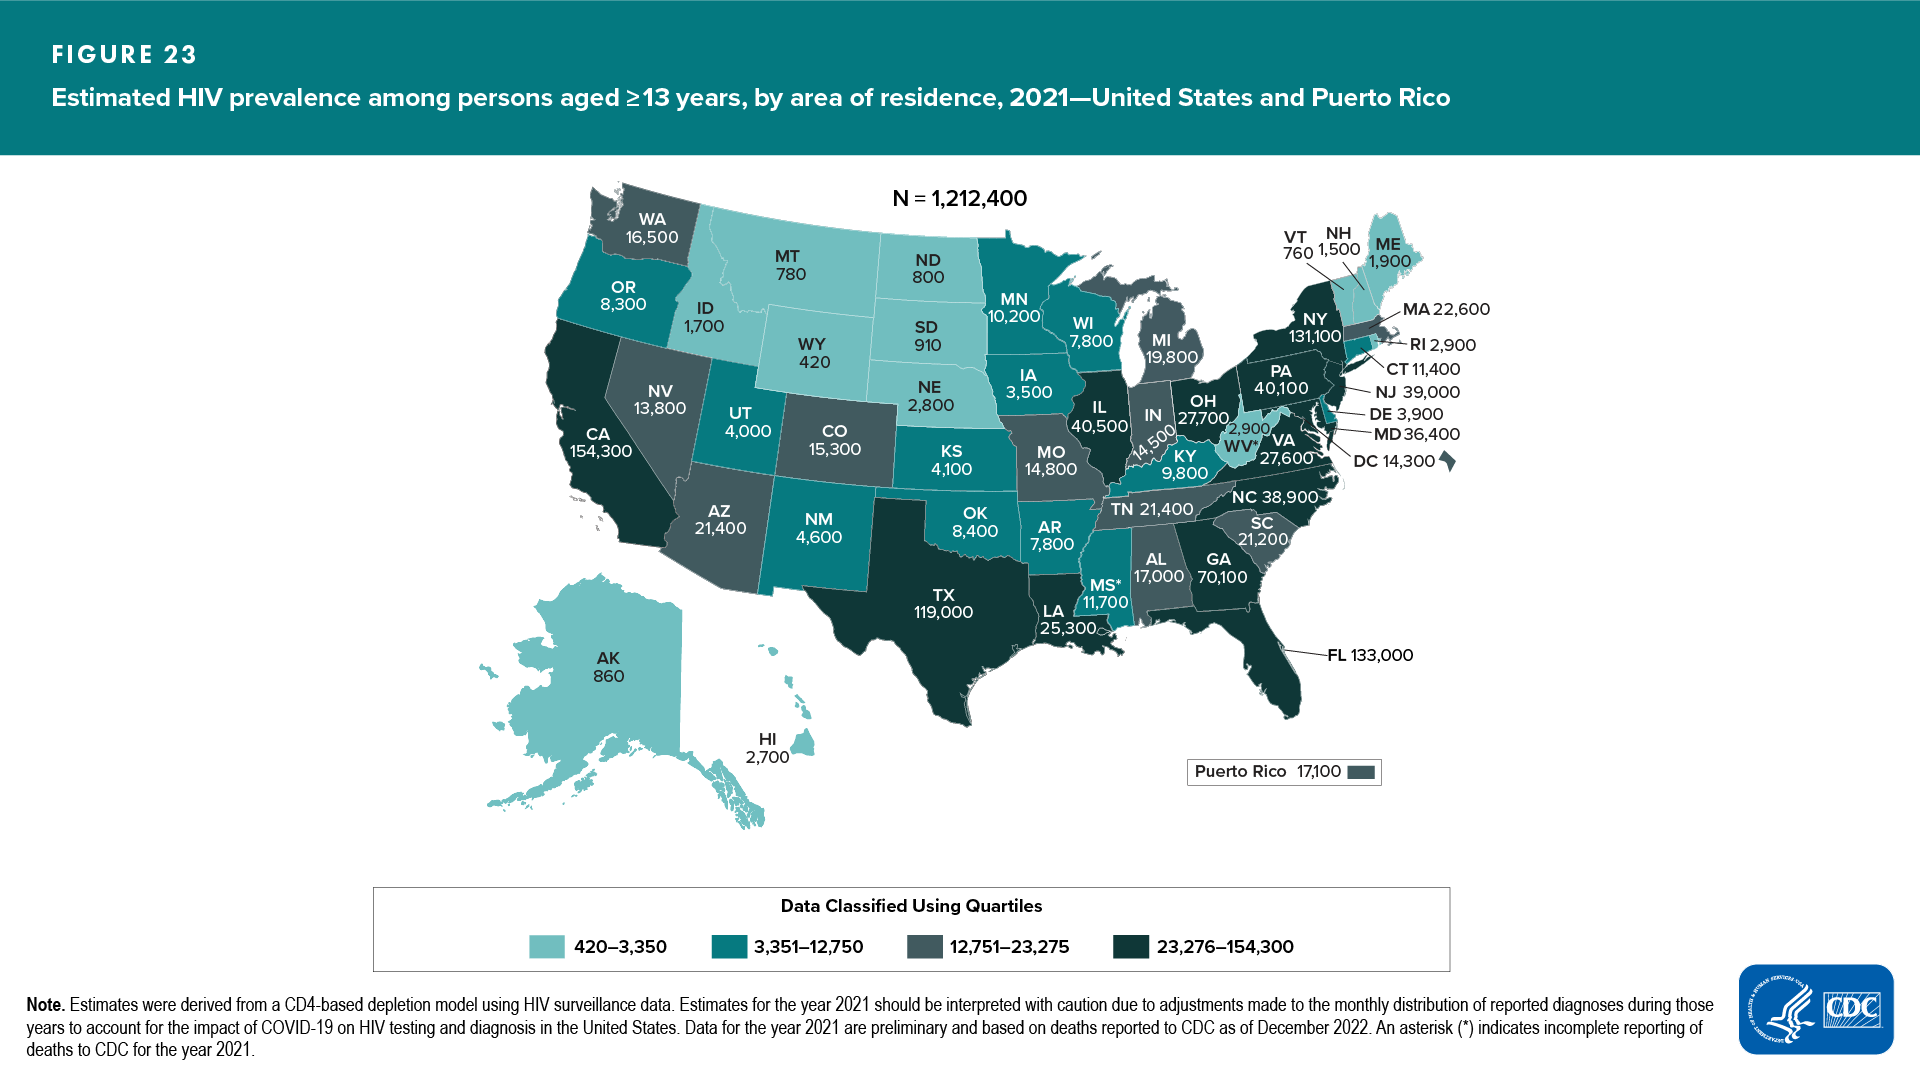 Figure 23. Estimated HIV prevalence among persons aged ≥13 years, by area of residence, 2019—United States and Puerto Rico